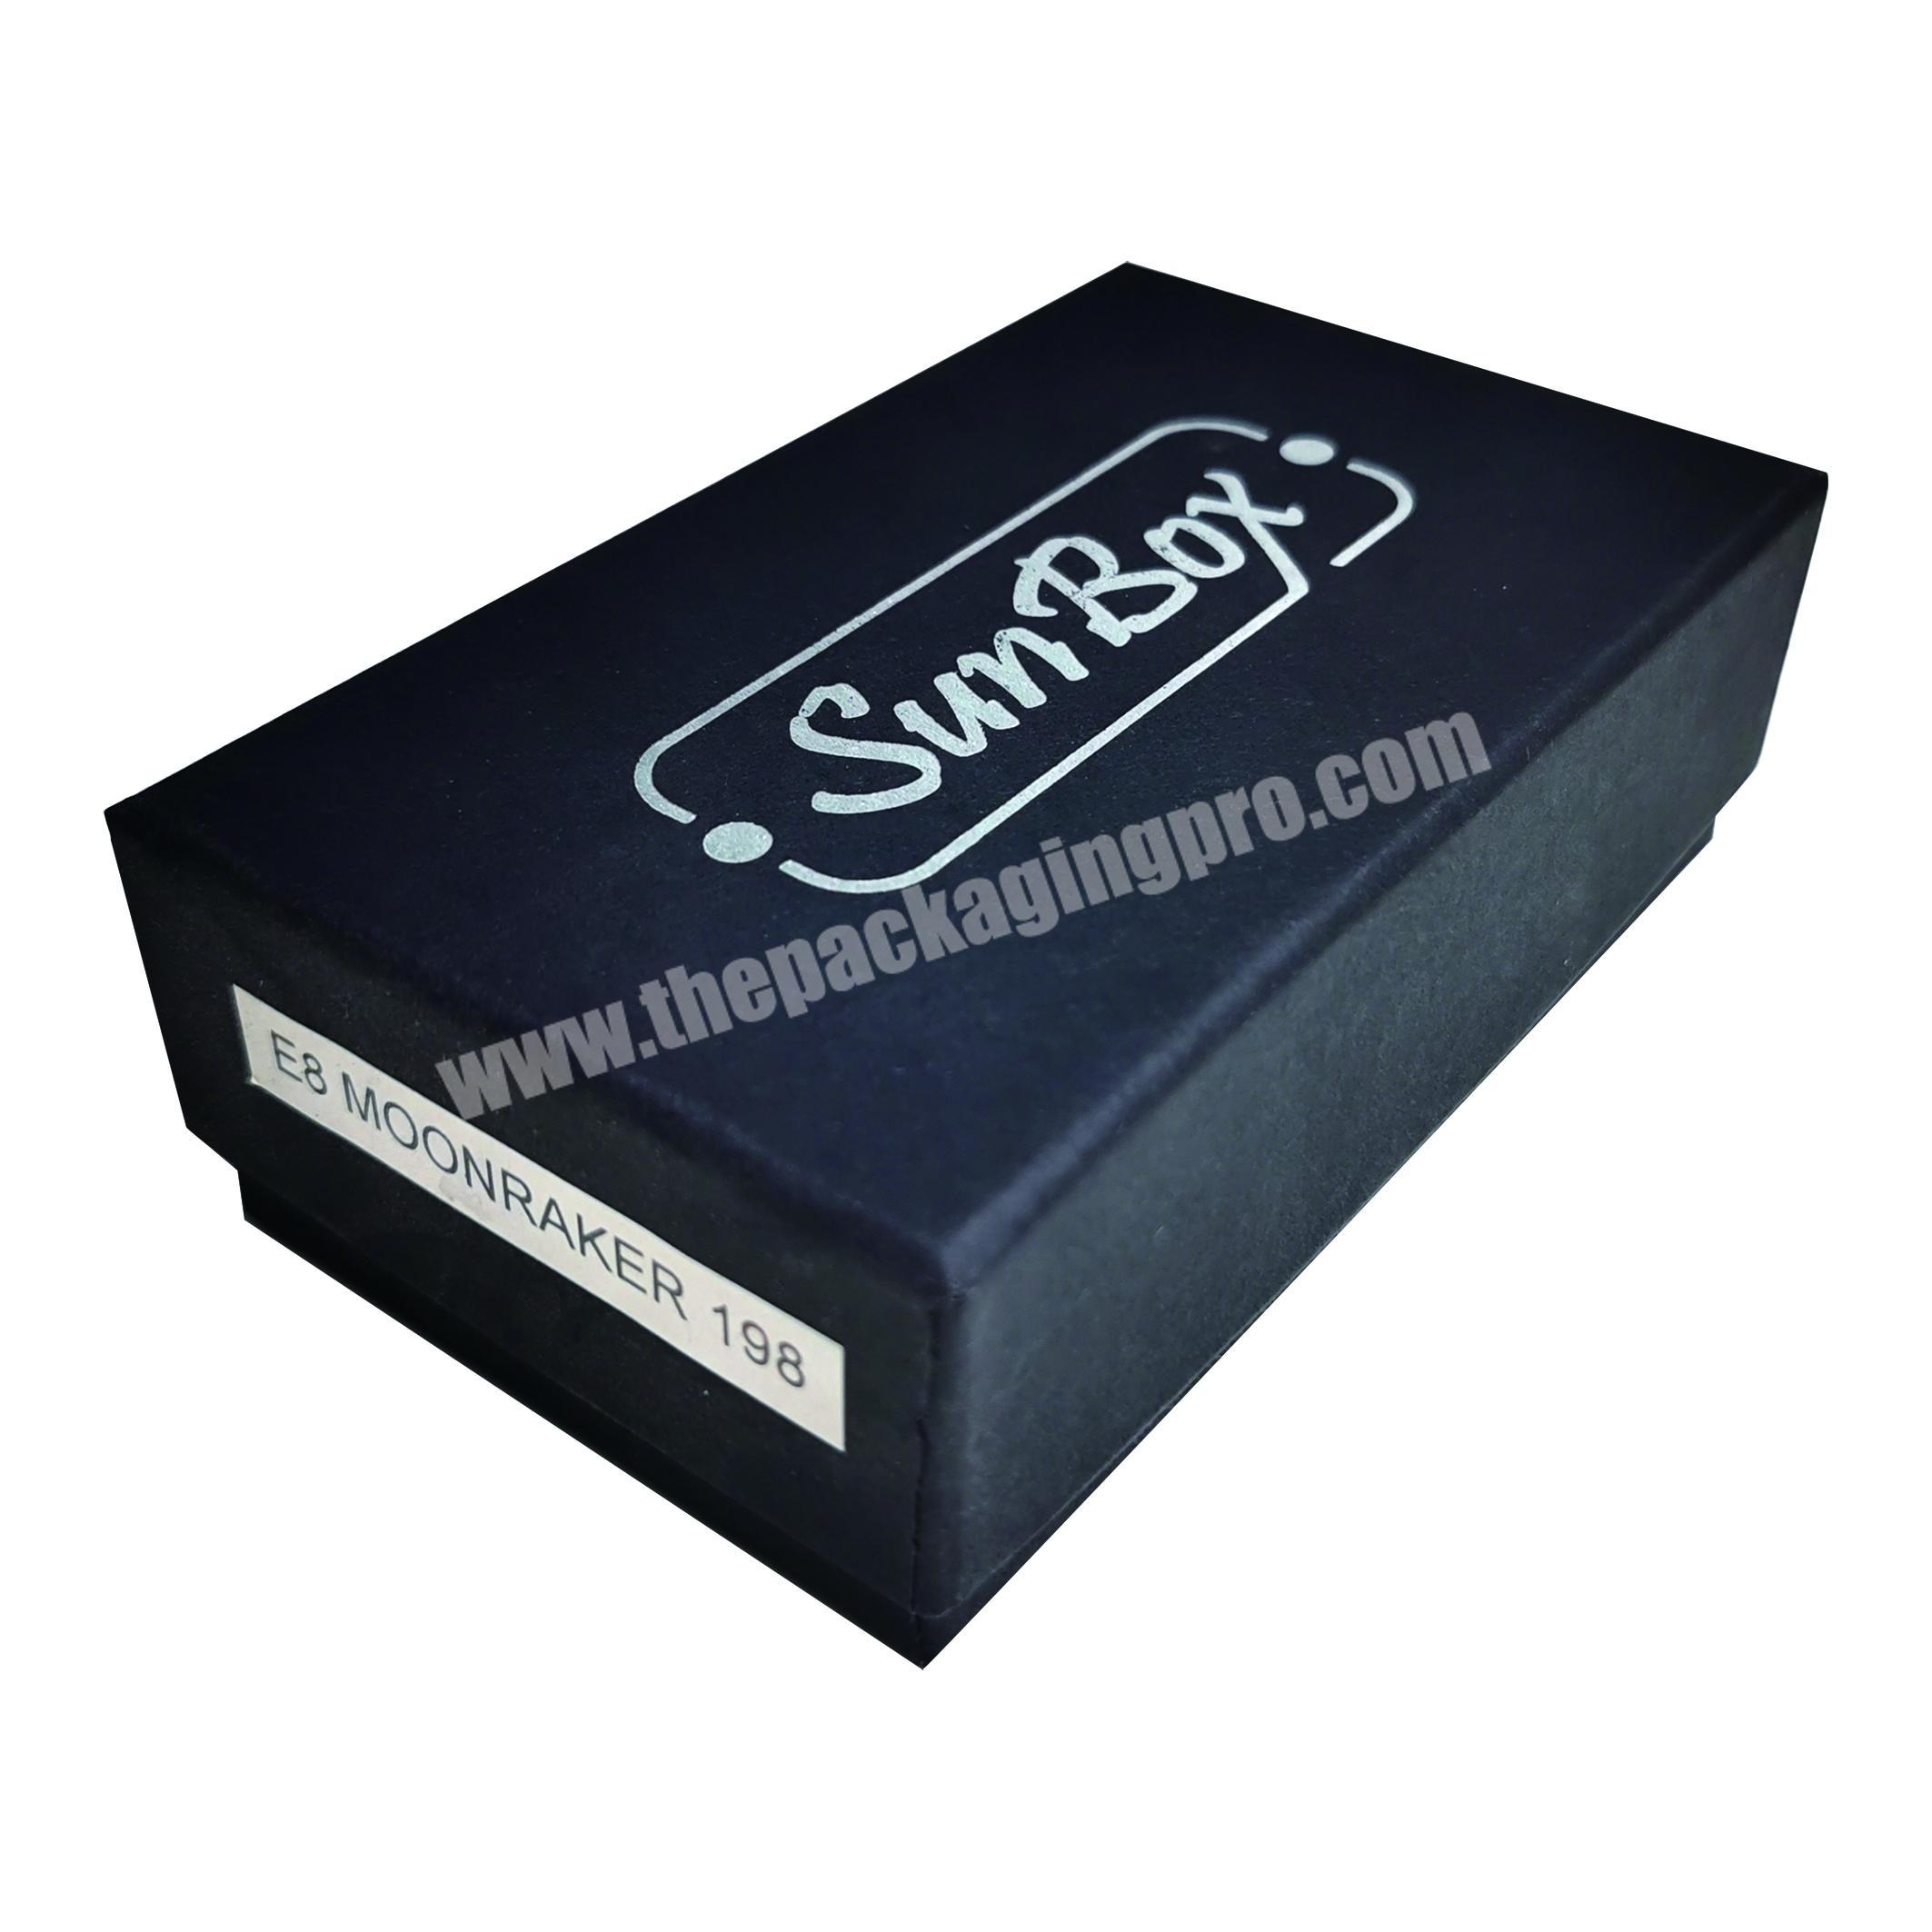 2020 Wholesale New Cardboard Package Black Lid and Base Gift Box